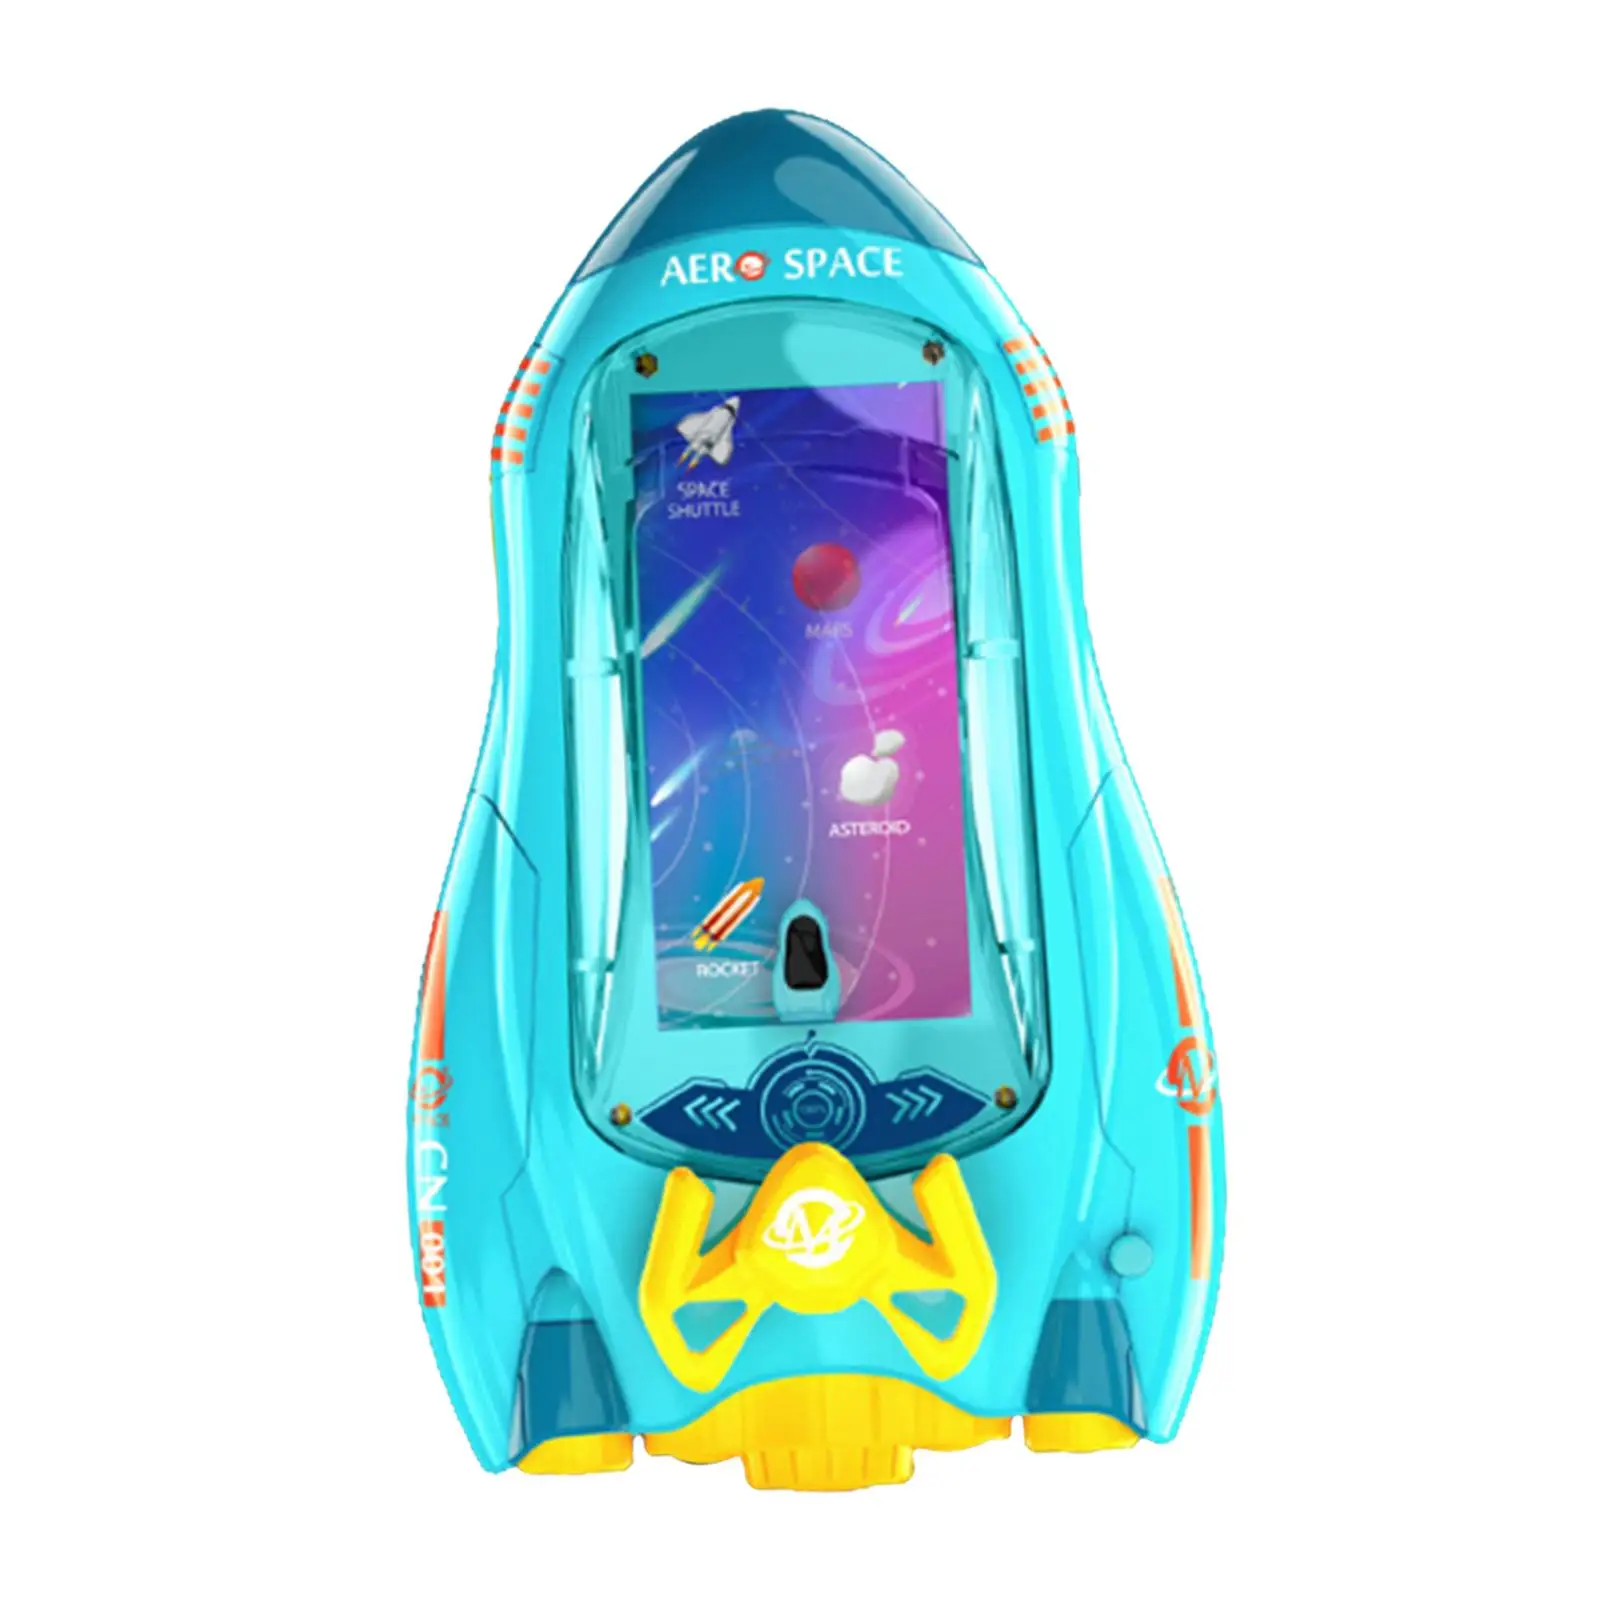 Kids Steering Wheel Toy Learning Educational Toys with Lights Pretend Play Toy Portable for Child Boys Girls Birthday Gifts